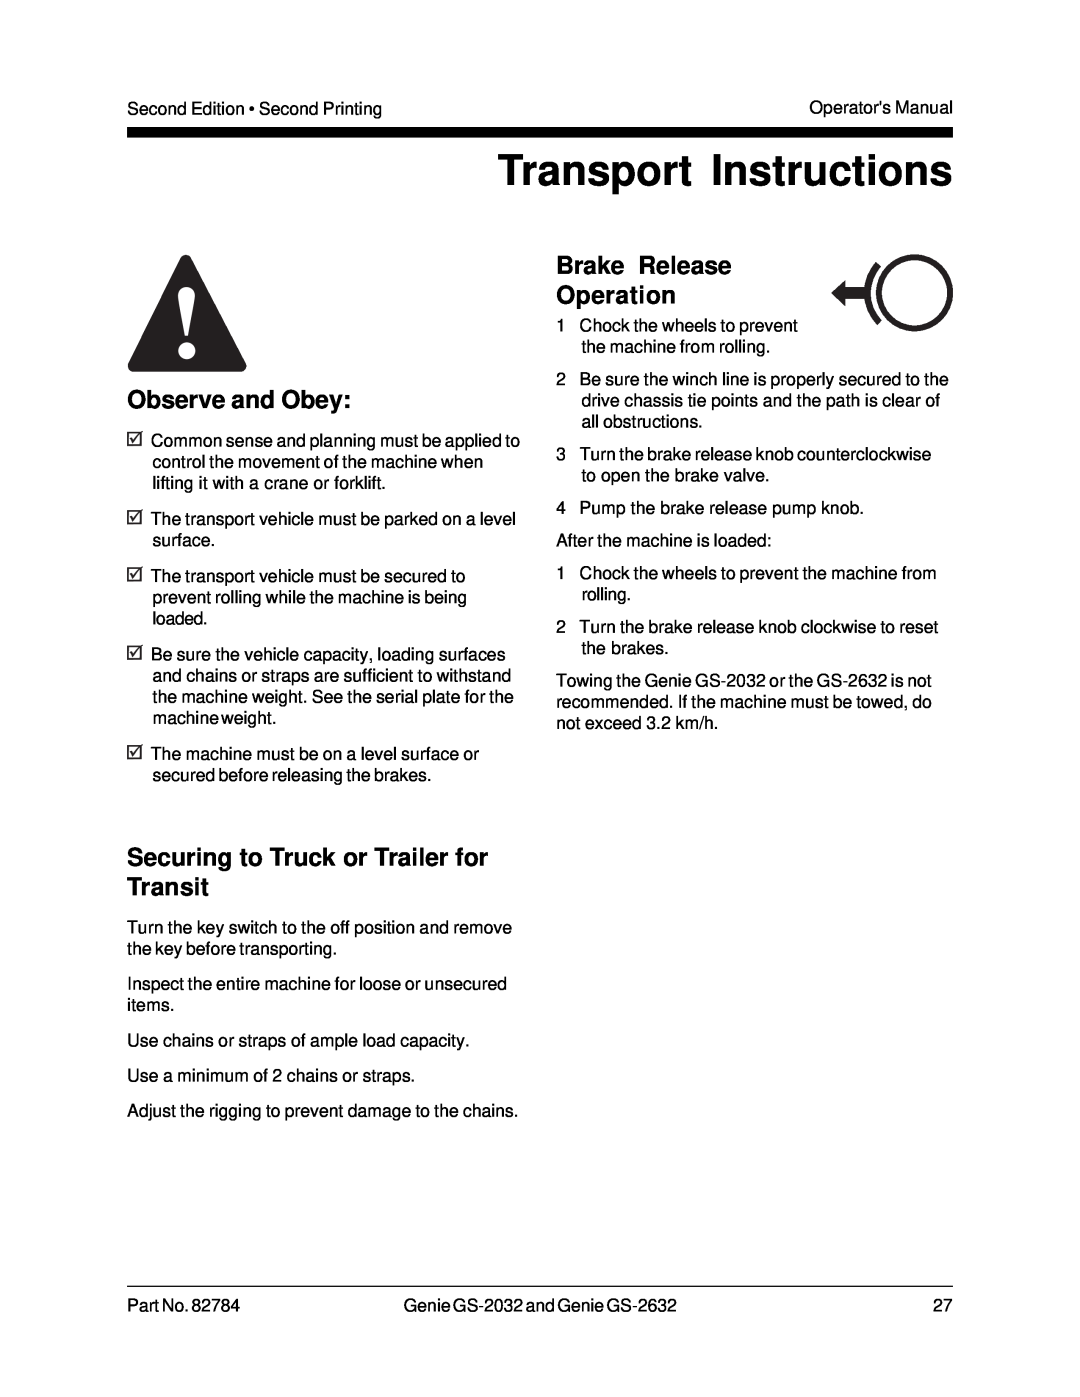 Genie 82784 Transport Instructions, Brake Release Operation, Securing to Truck or Trailer for Transit, Observe and Obey 